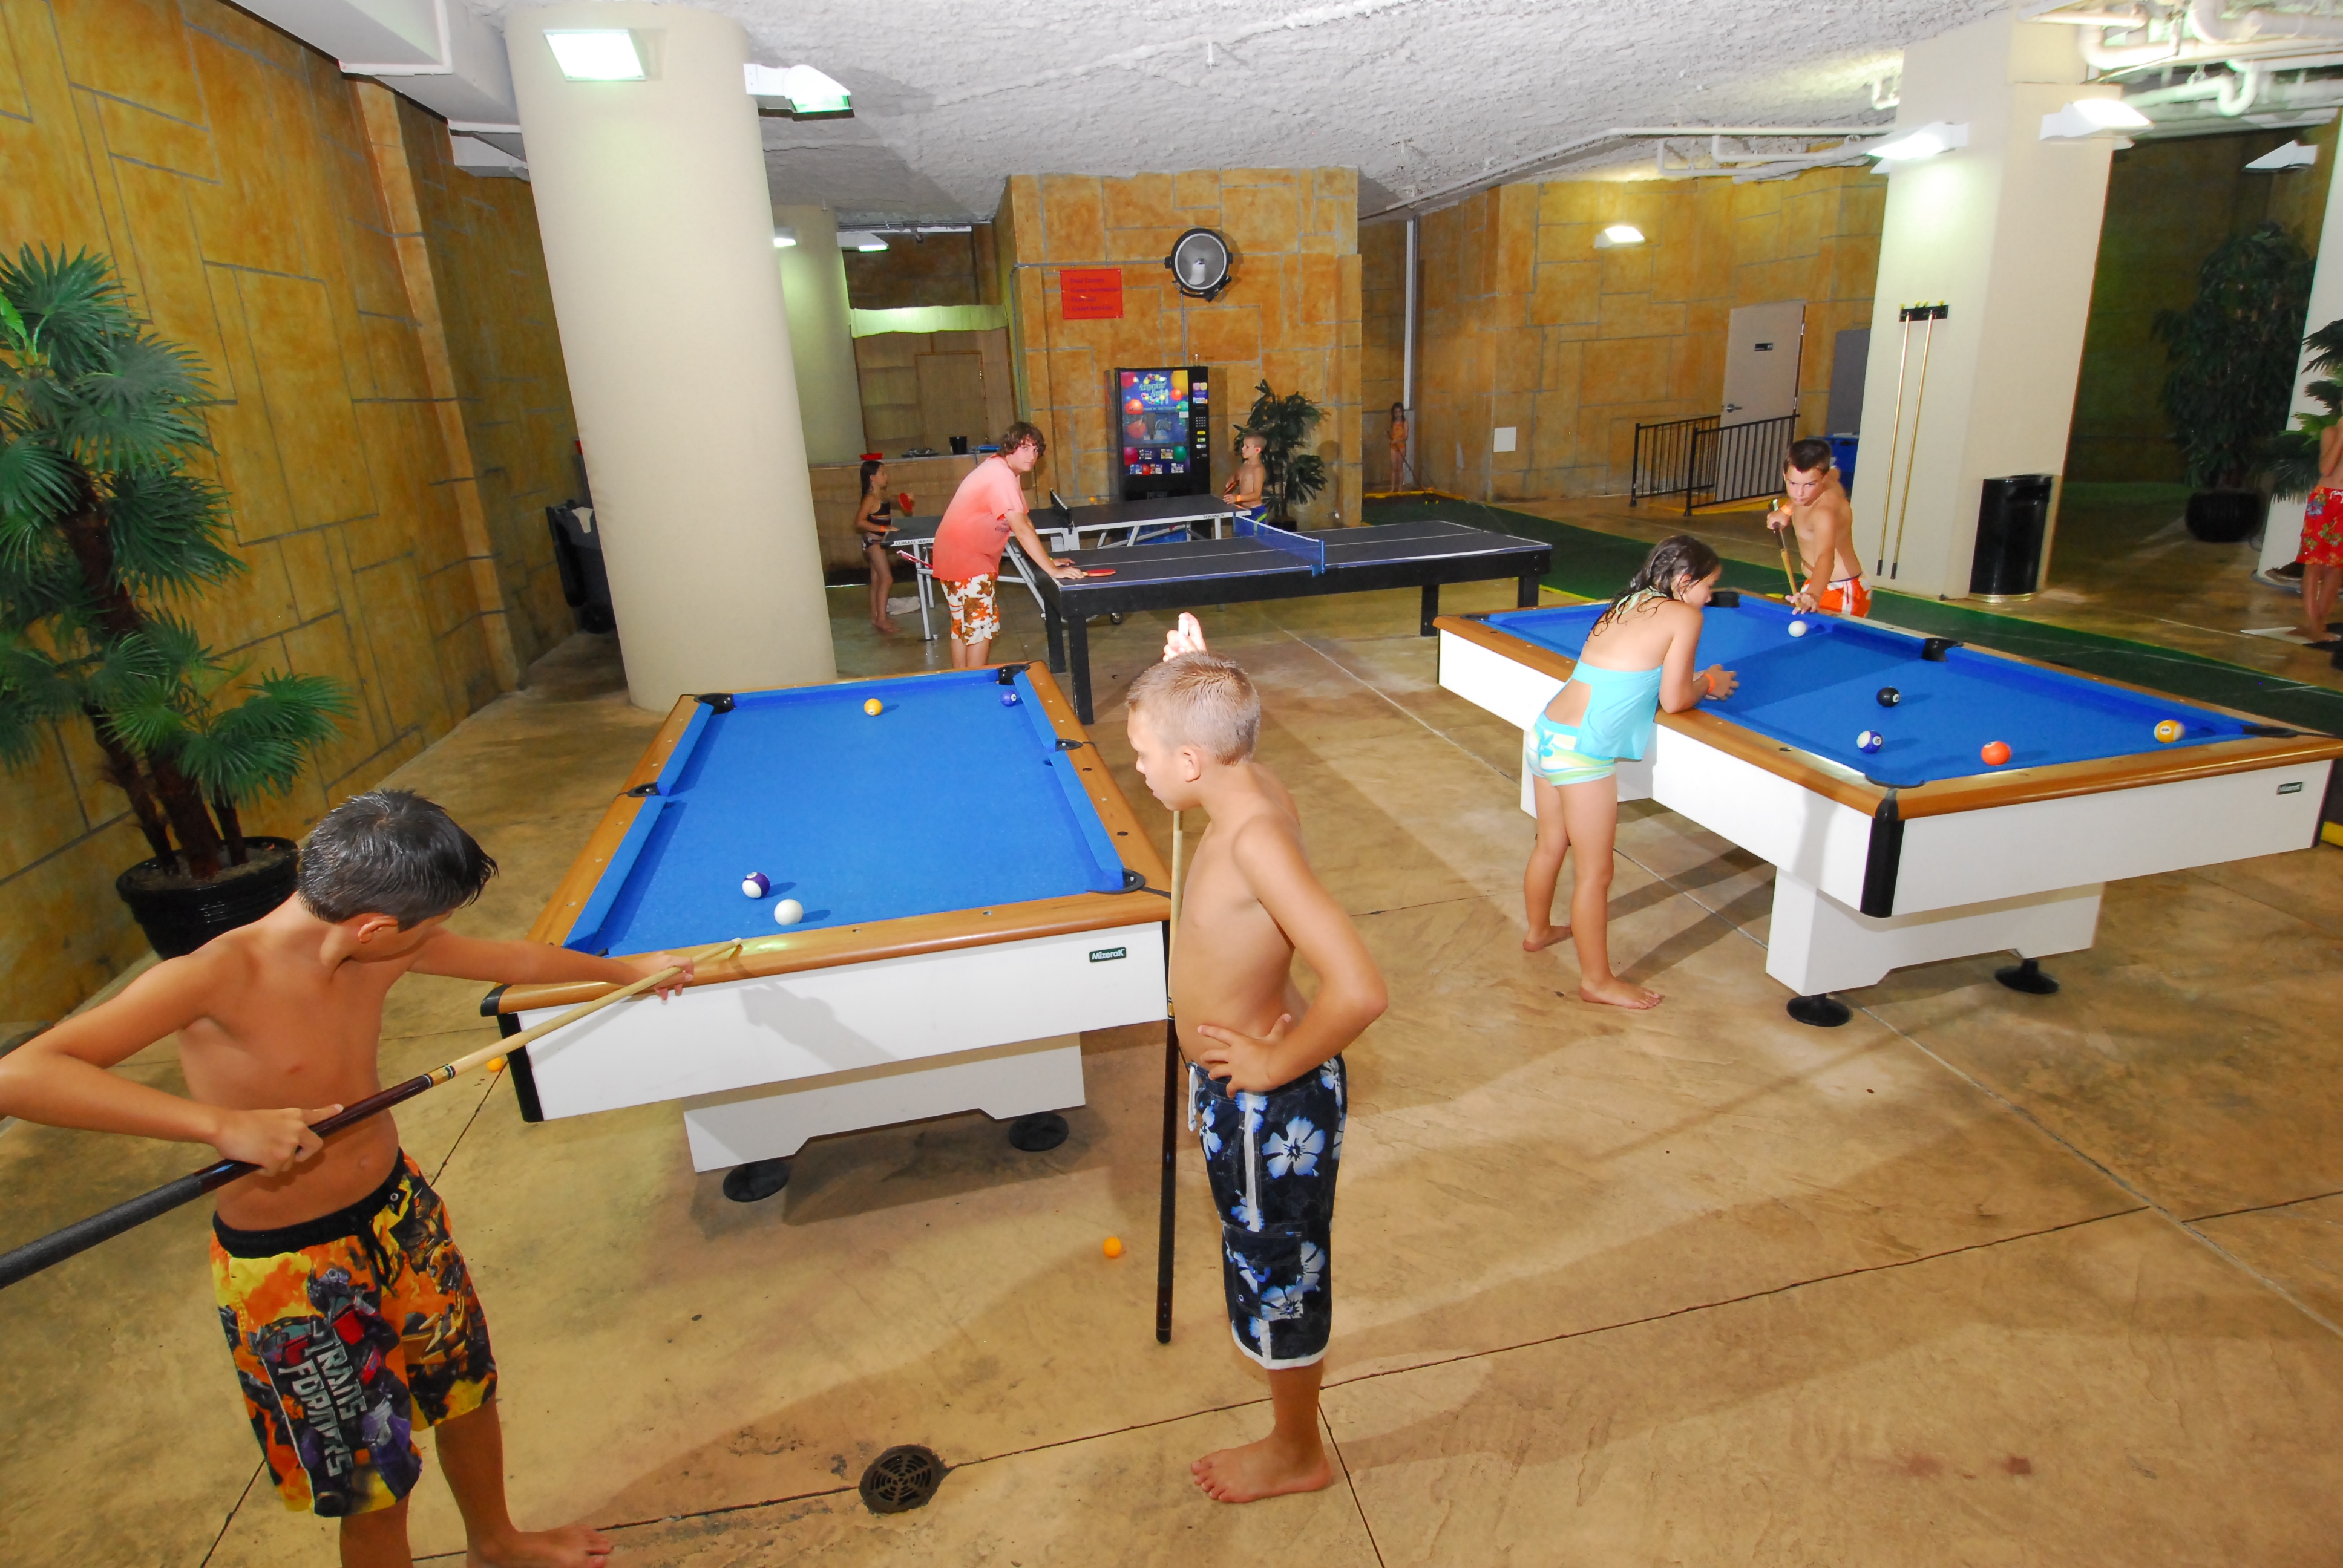 Kids playing pool and table tennis at Dunes Village Resort Myrtle Beach.